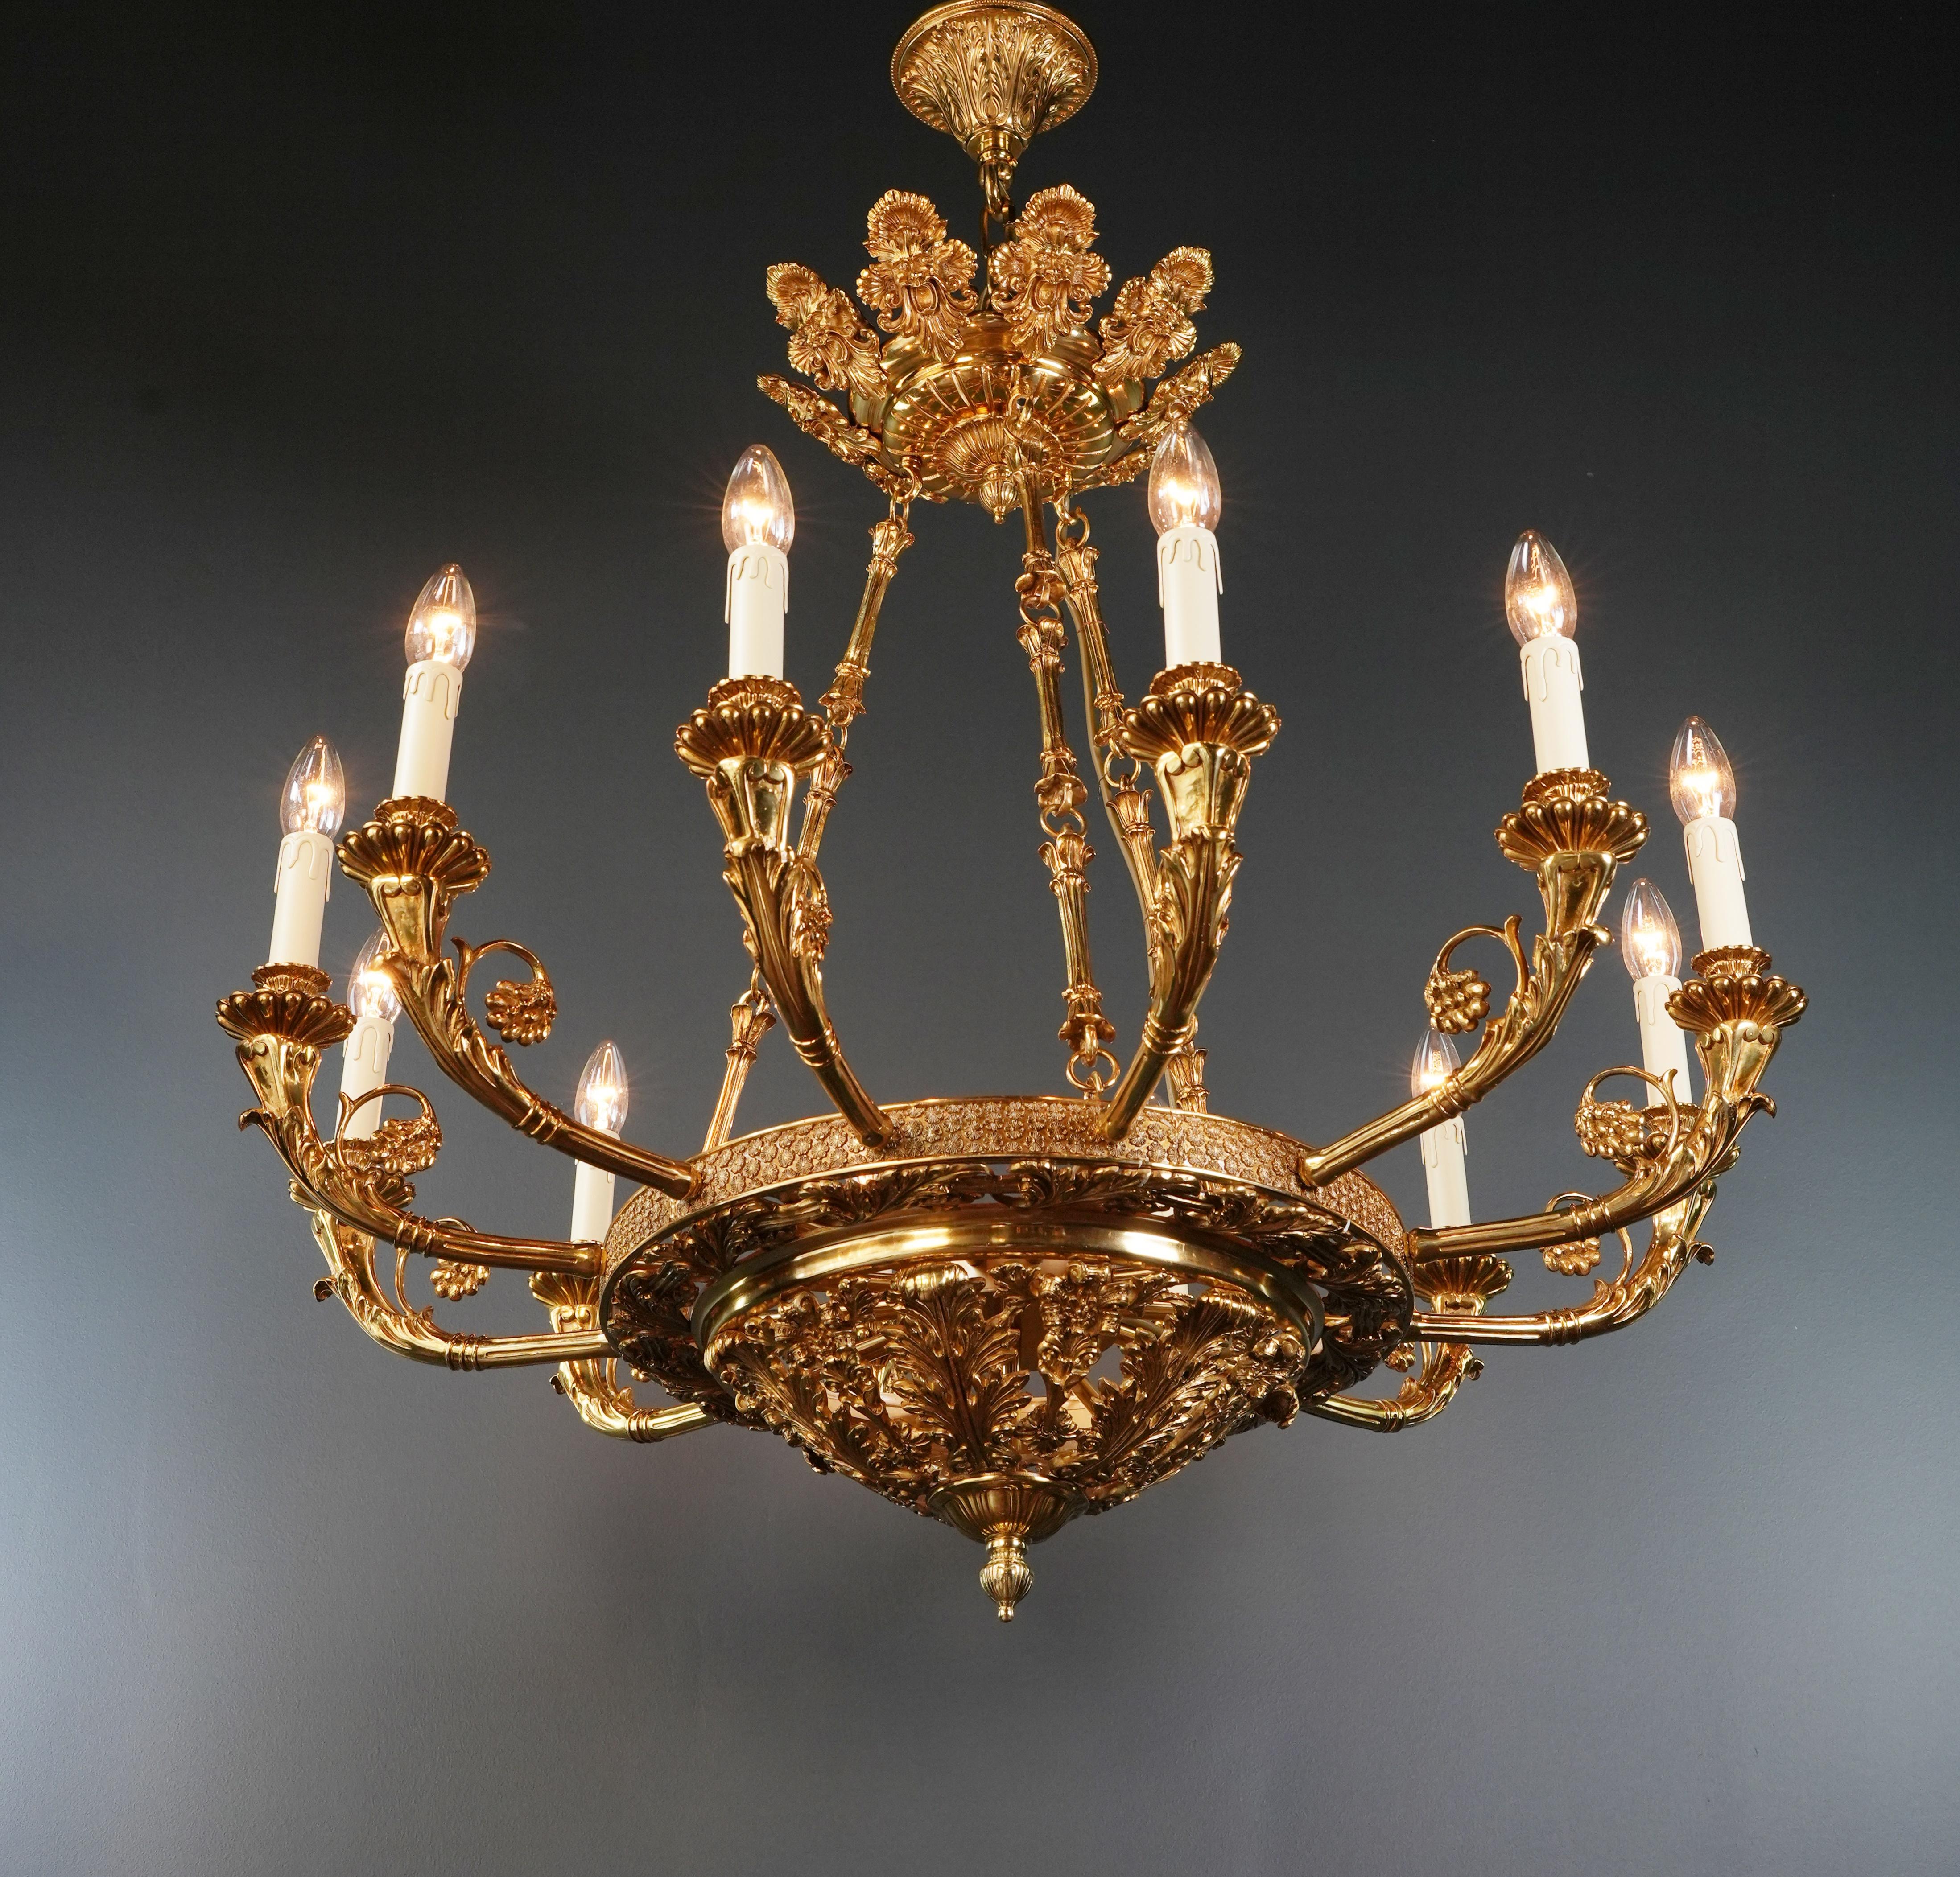 Hand-Knotted Baroque Brass Empire Chandelier Crystal Lustre Lamp Antique Gold For Sale